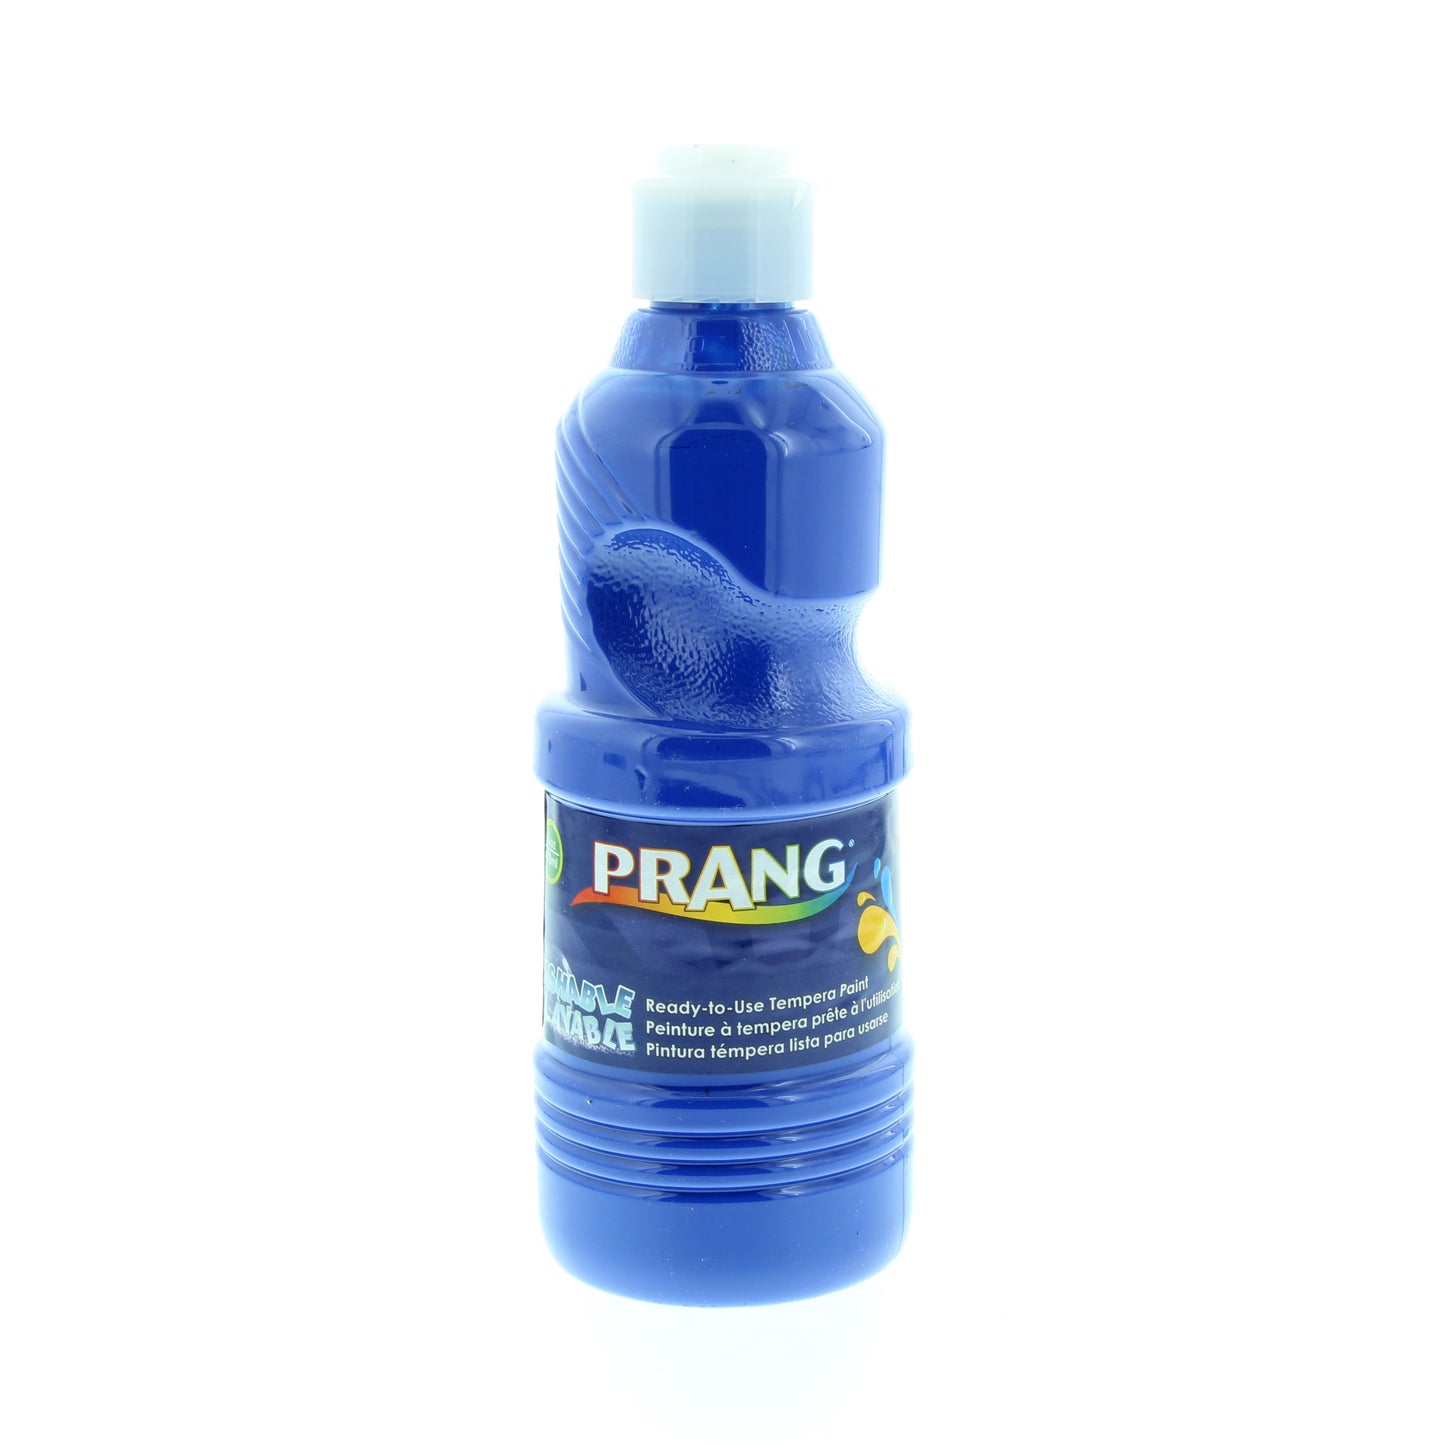 Prang Washable Ready-to-Use Tempera Paint